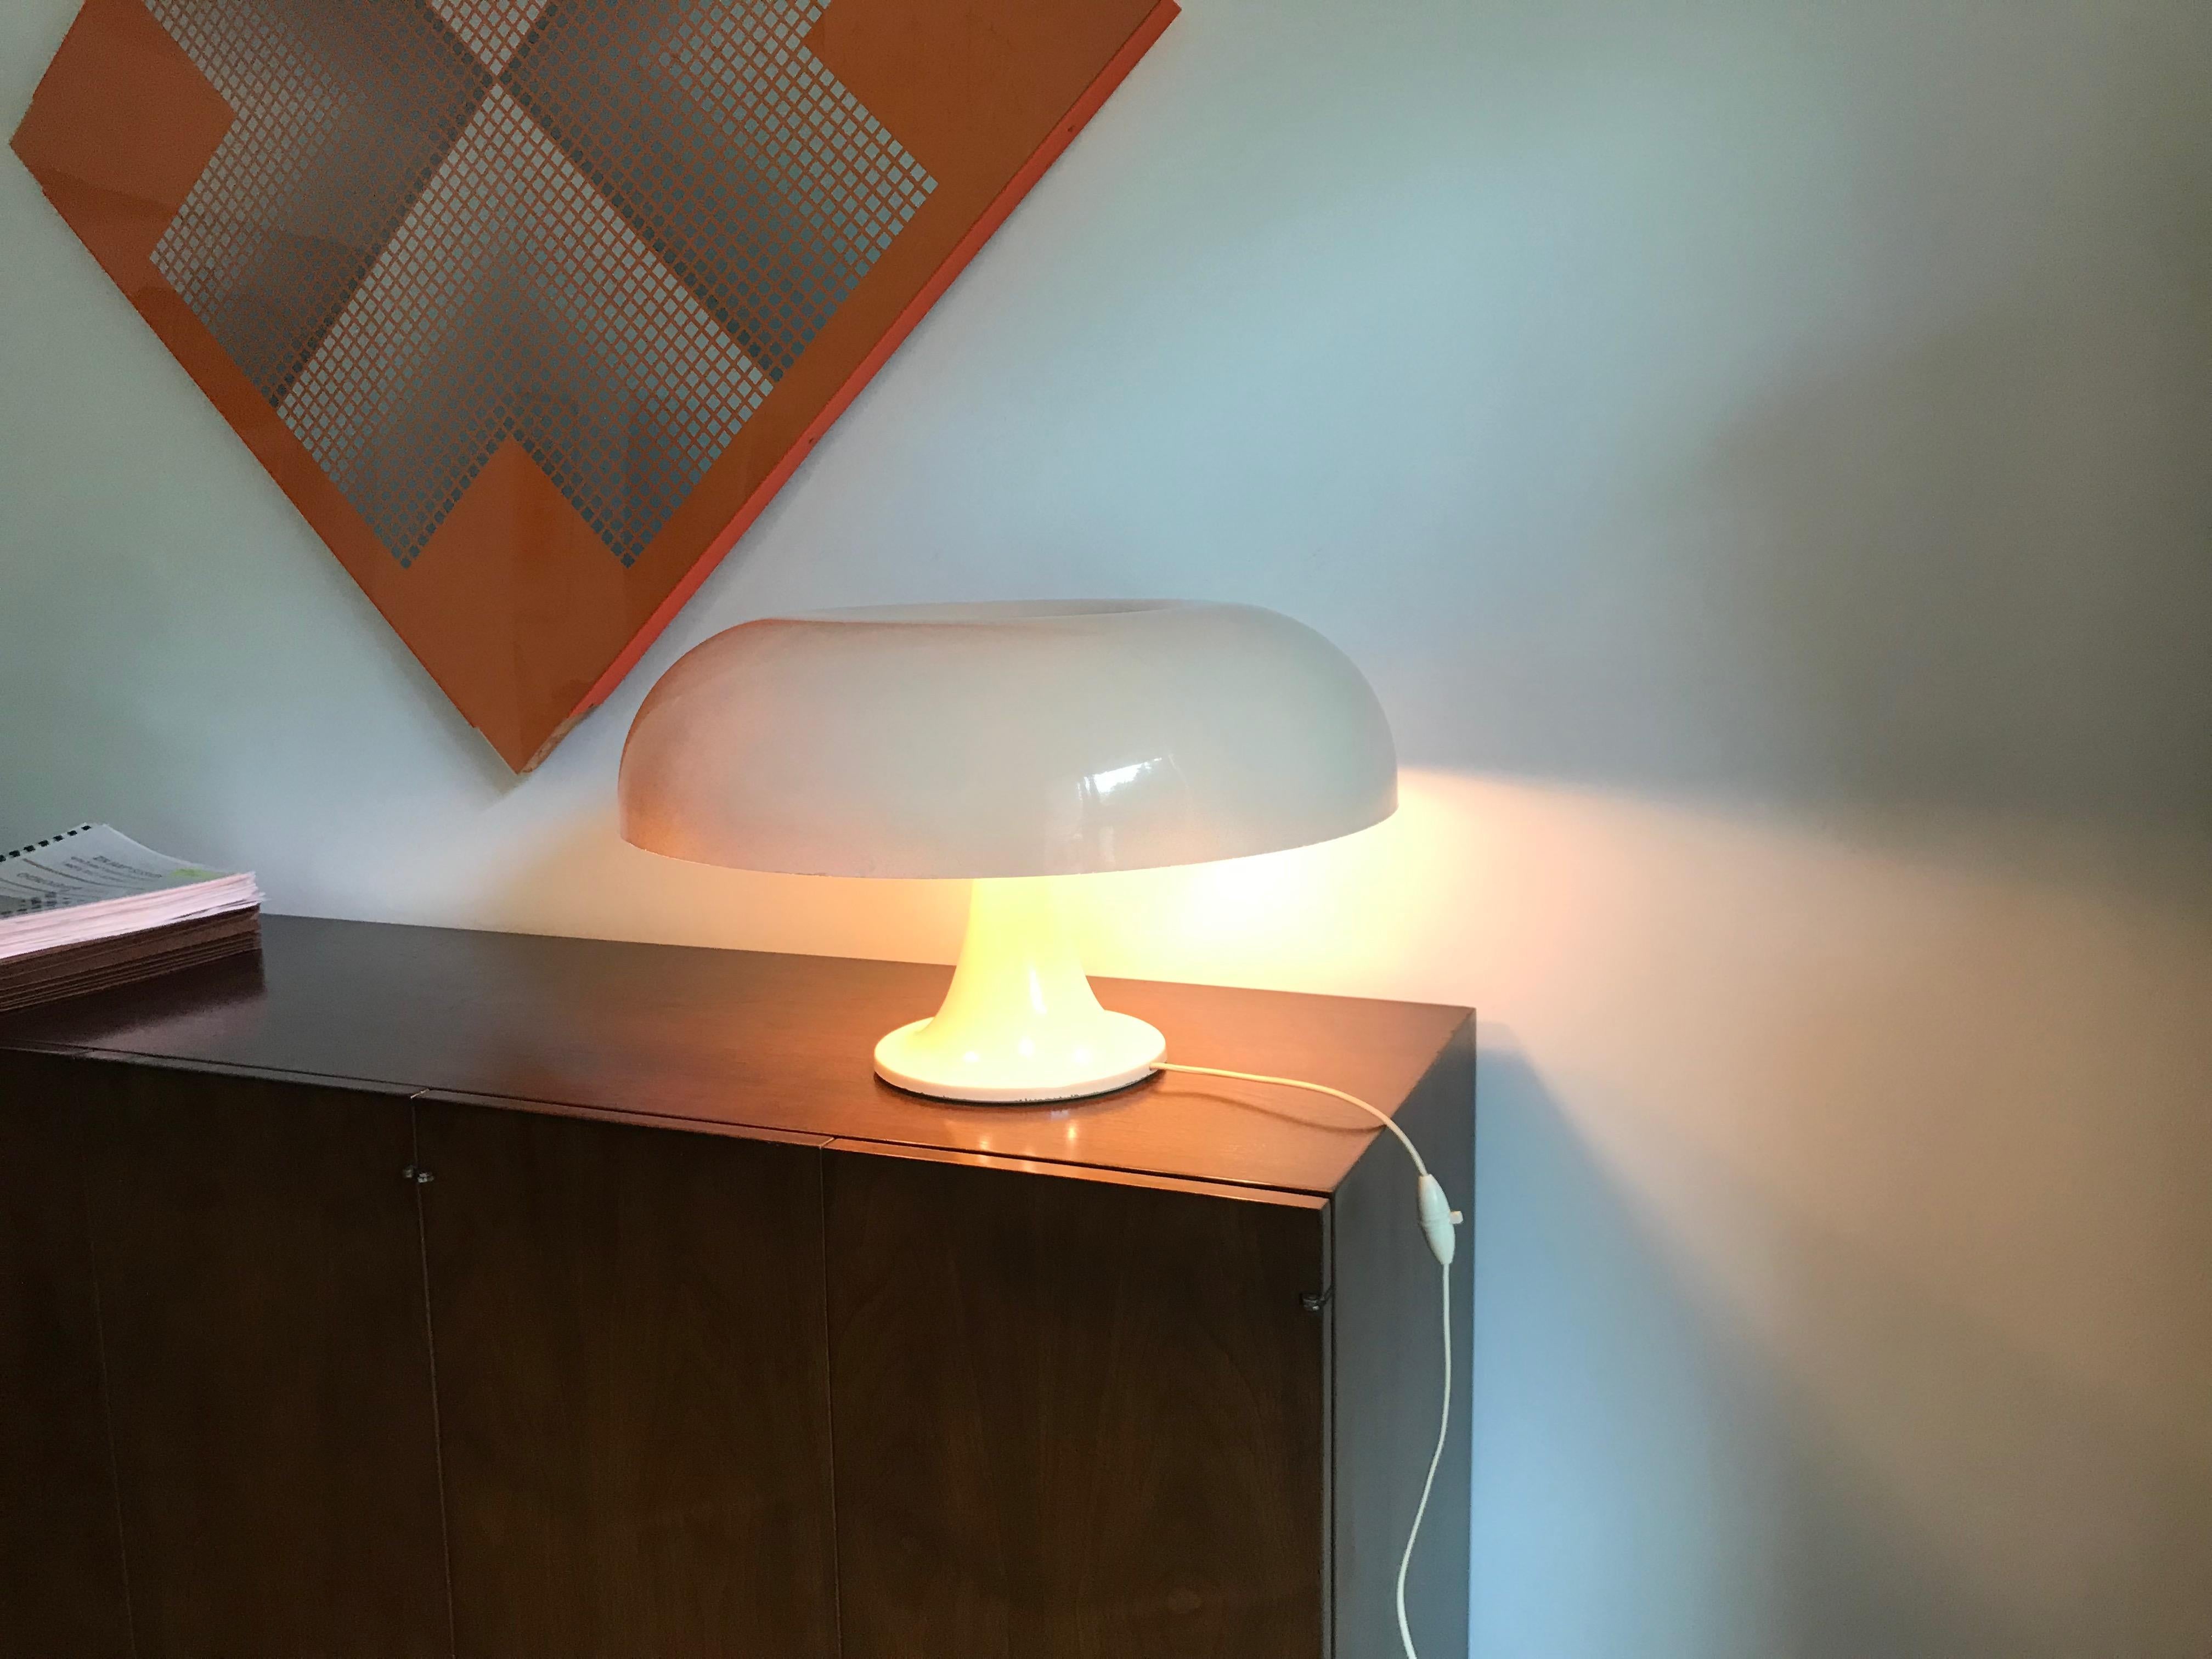 A classic pop mod design.
If you like original early modern design pieces? Then this lamp is for you. 
This is an early hand laminated limited production fiberglass shade.
It does not have the branded logo on the bottom. That was added in later and